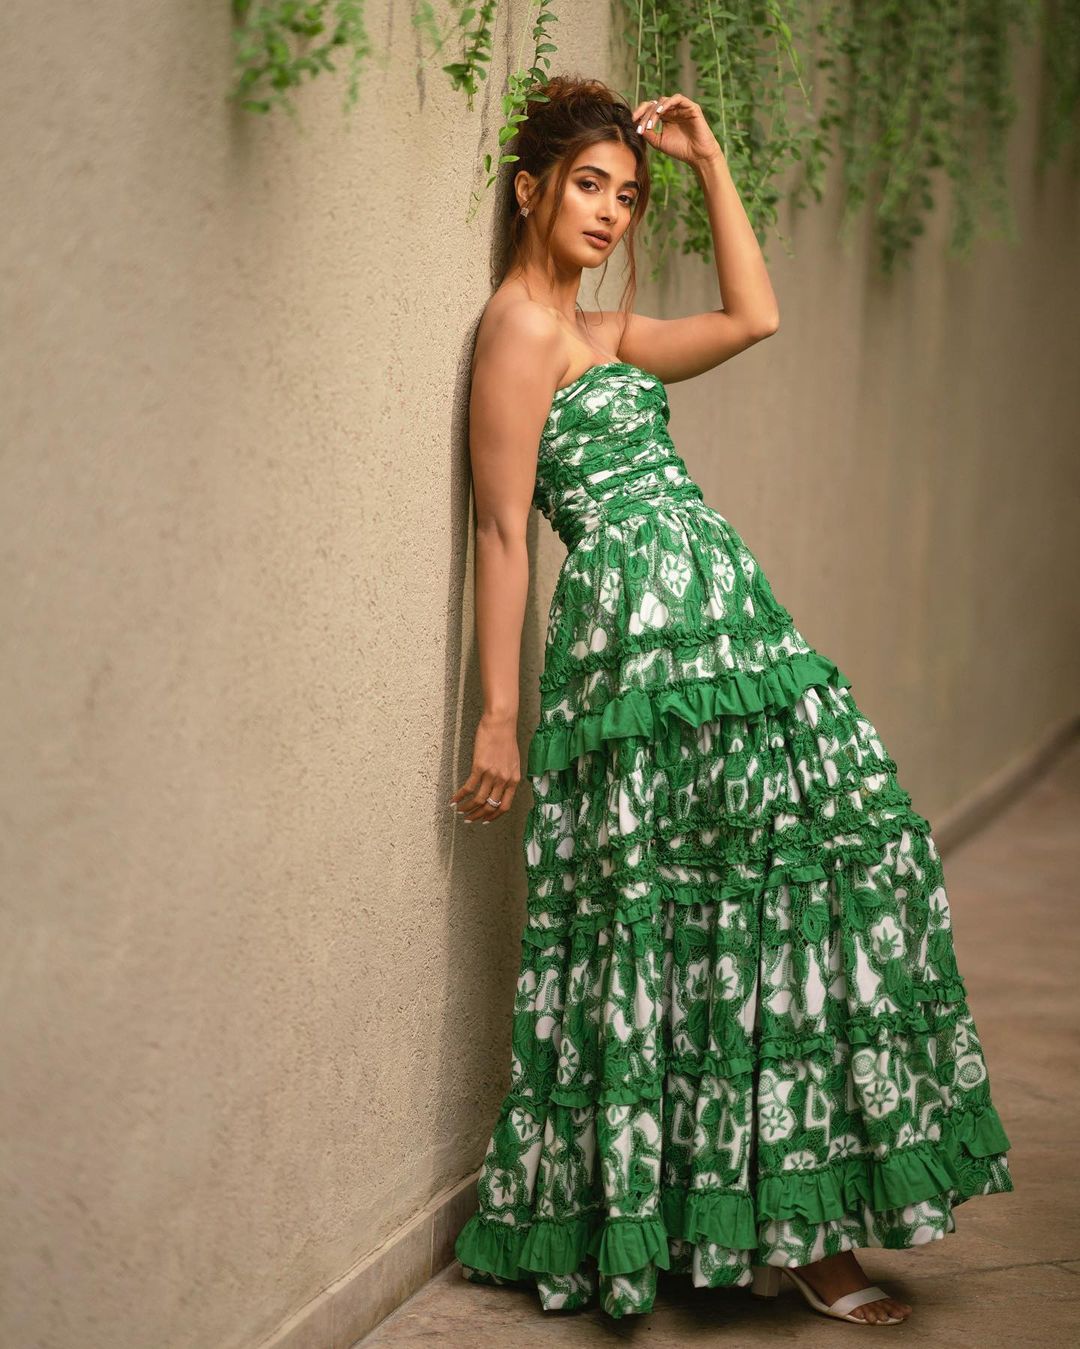 Pooja Hegde gives boho chic vibes in the printed green tiered dress